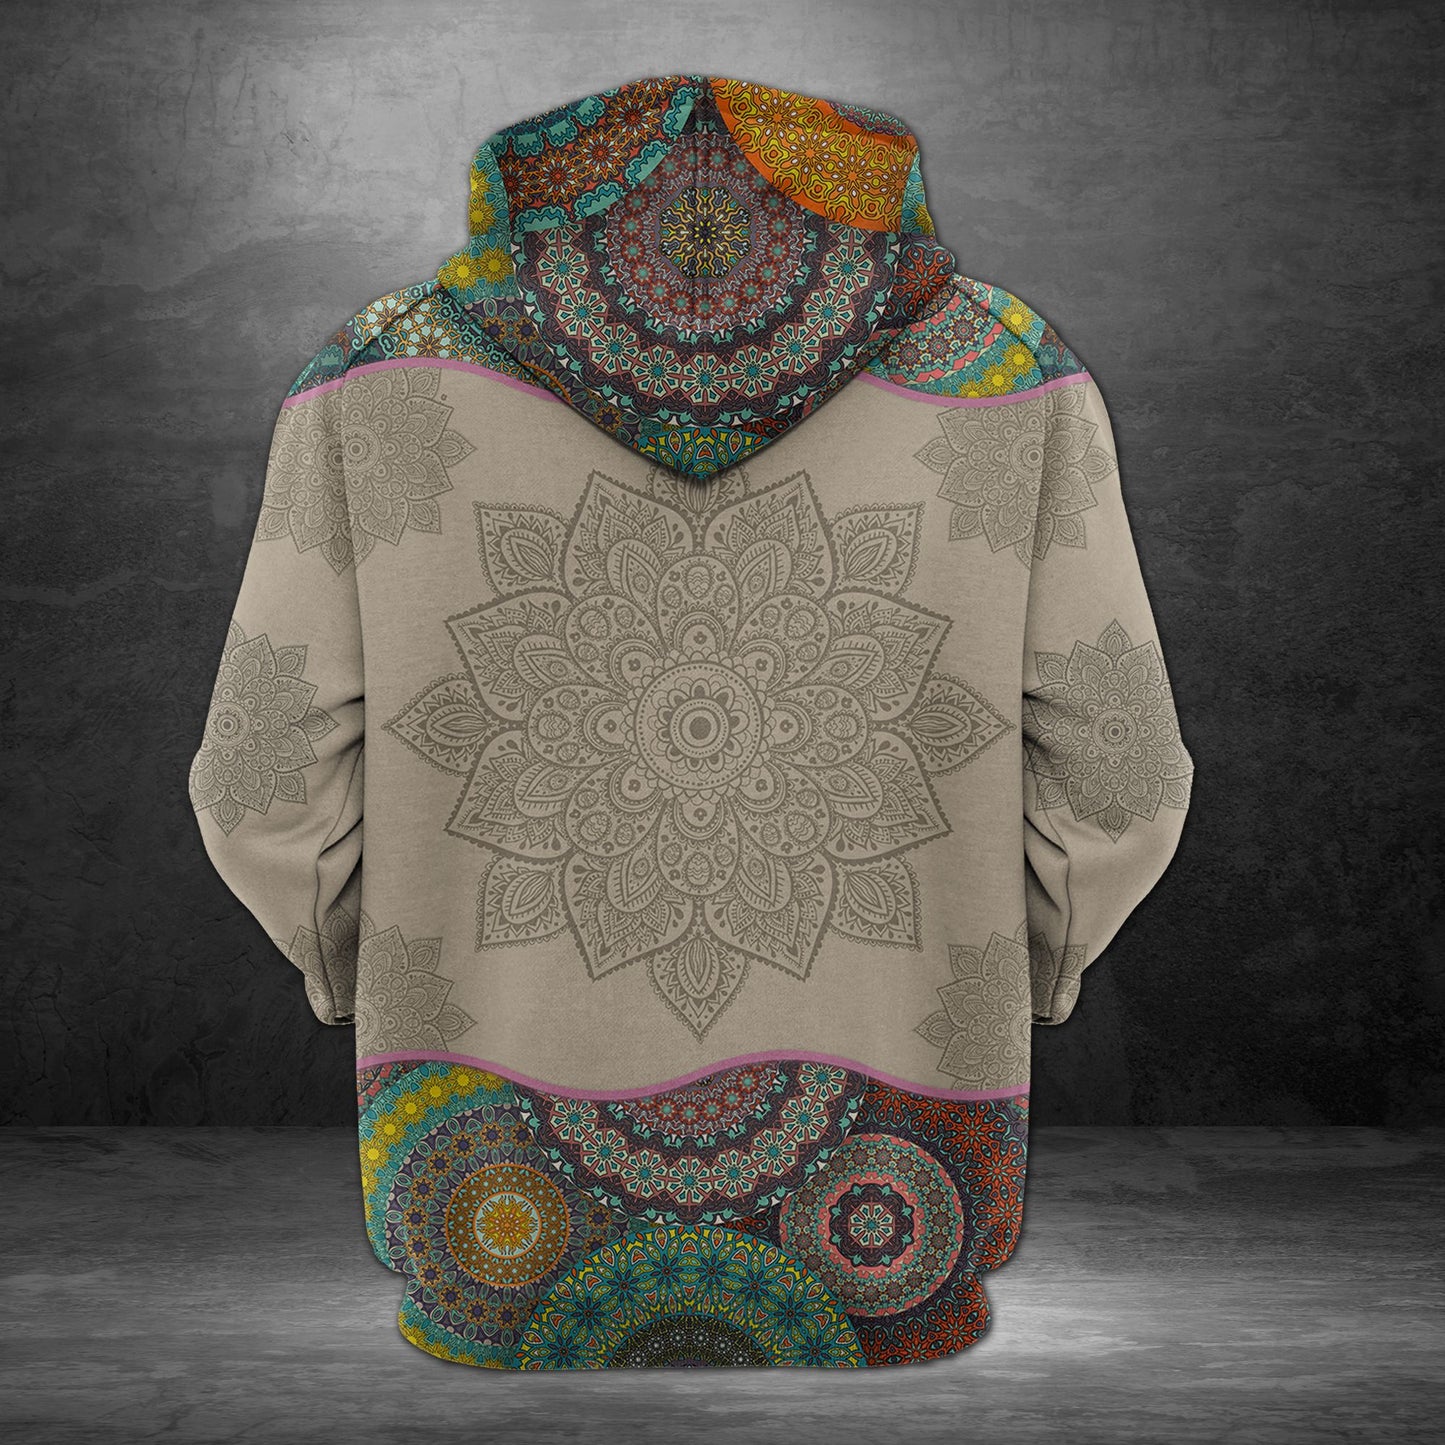 Awesome Maine Mandala H14503 - All Over Print Unisex Hoodie